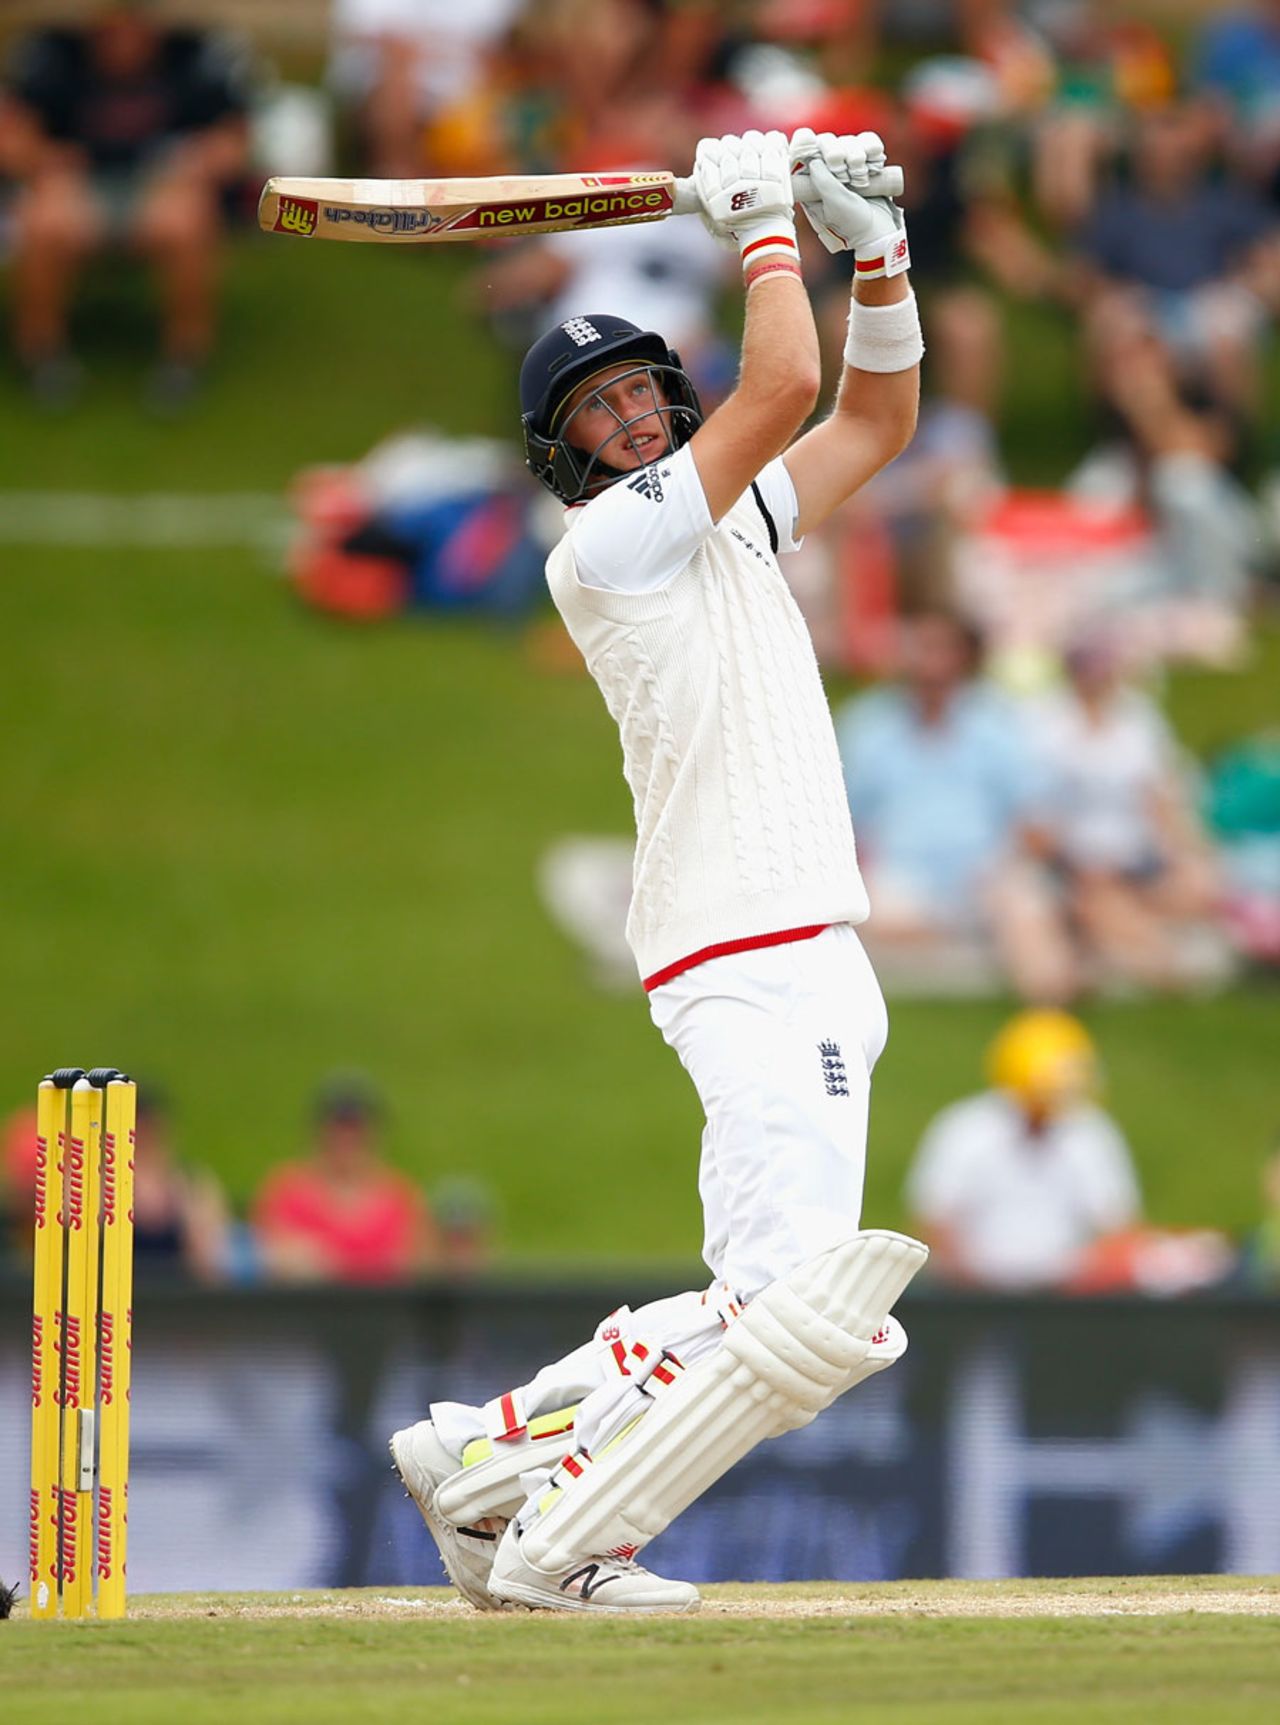 Joe Root continued his good form by going past 50, South Africa v England, 4th Test, Centurion, 3rd day, January 24, 2016